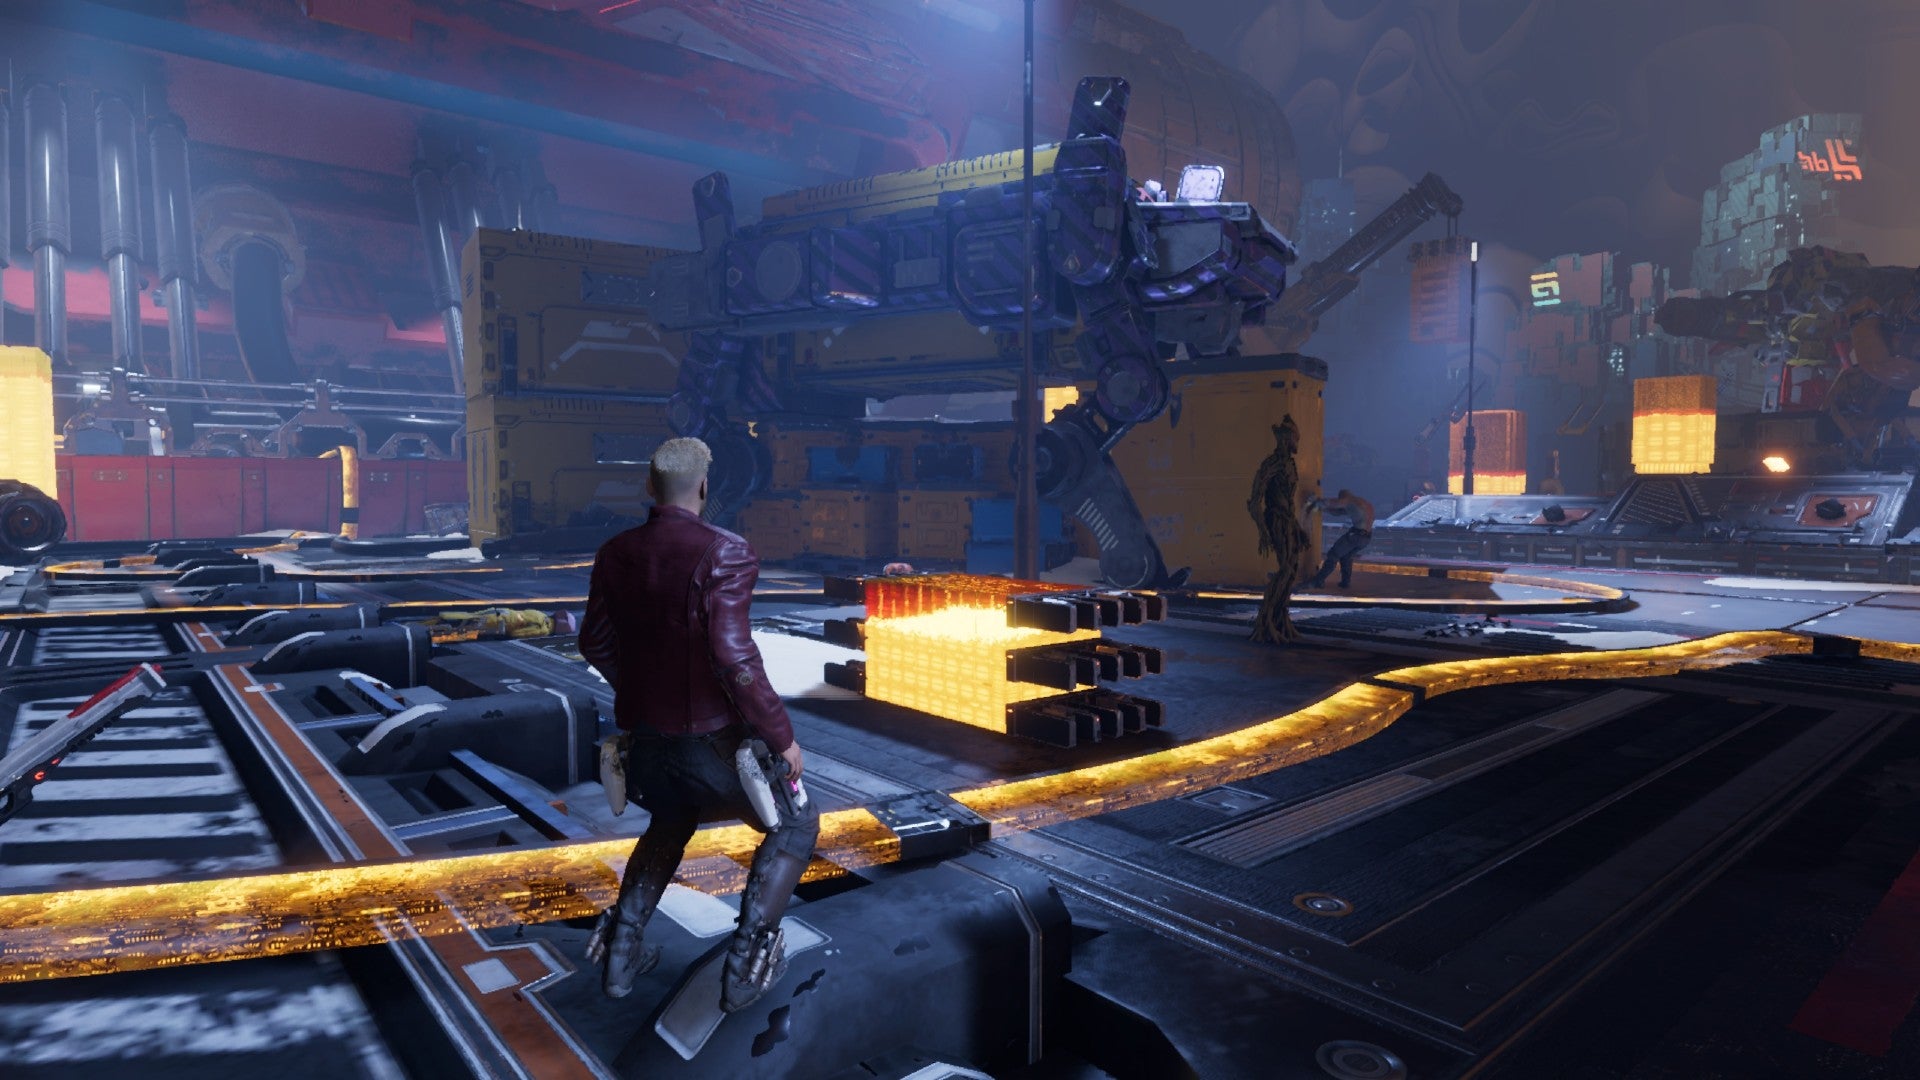 Star-Lord stood on a yellow cable whilst Drax moves container into position. Groot stands nearby